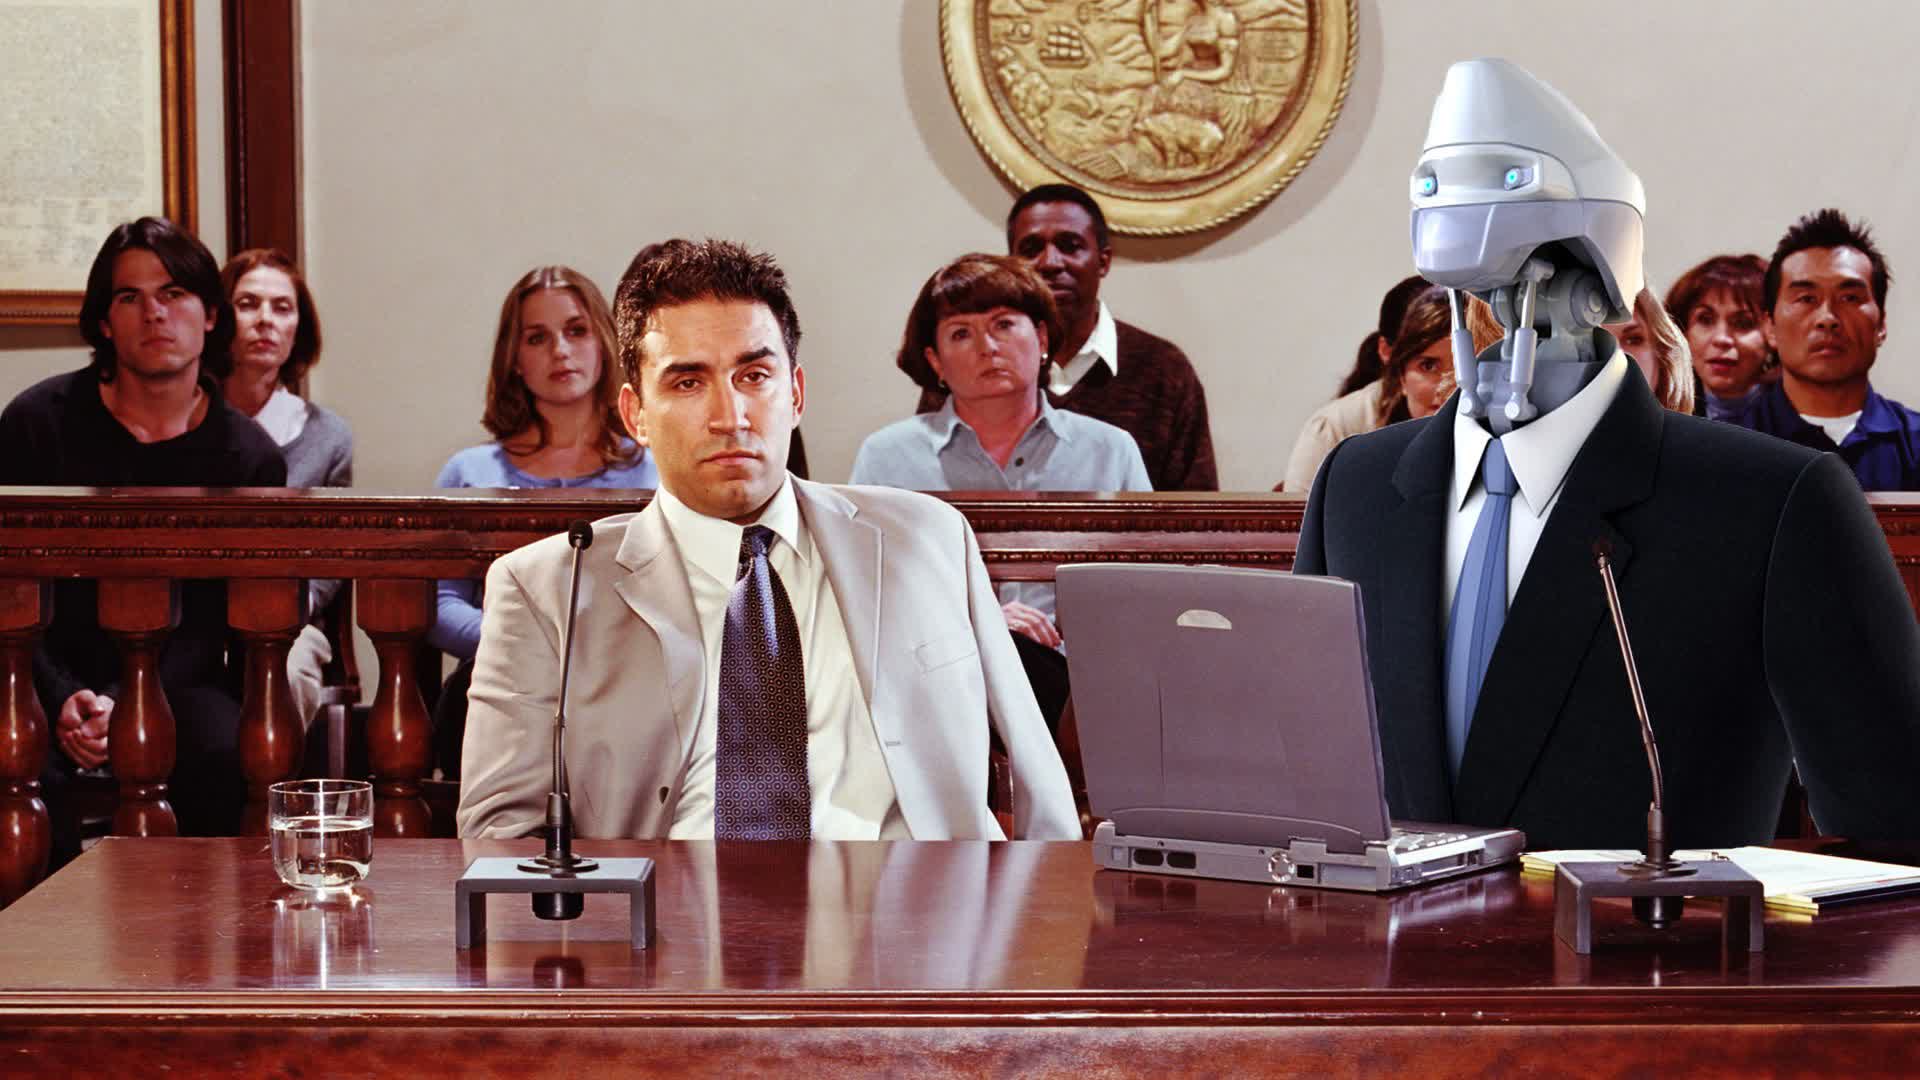 Robot lawyer" to present arguments in world's first AI-defended legal trial in February | TechSpot